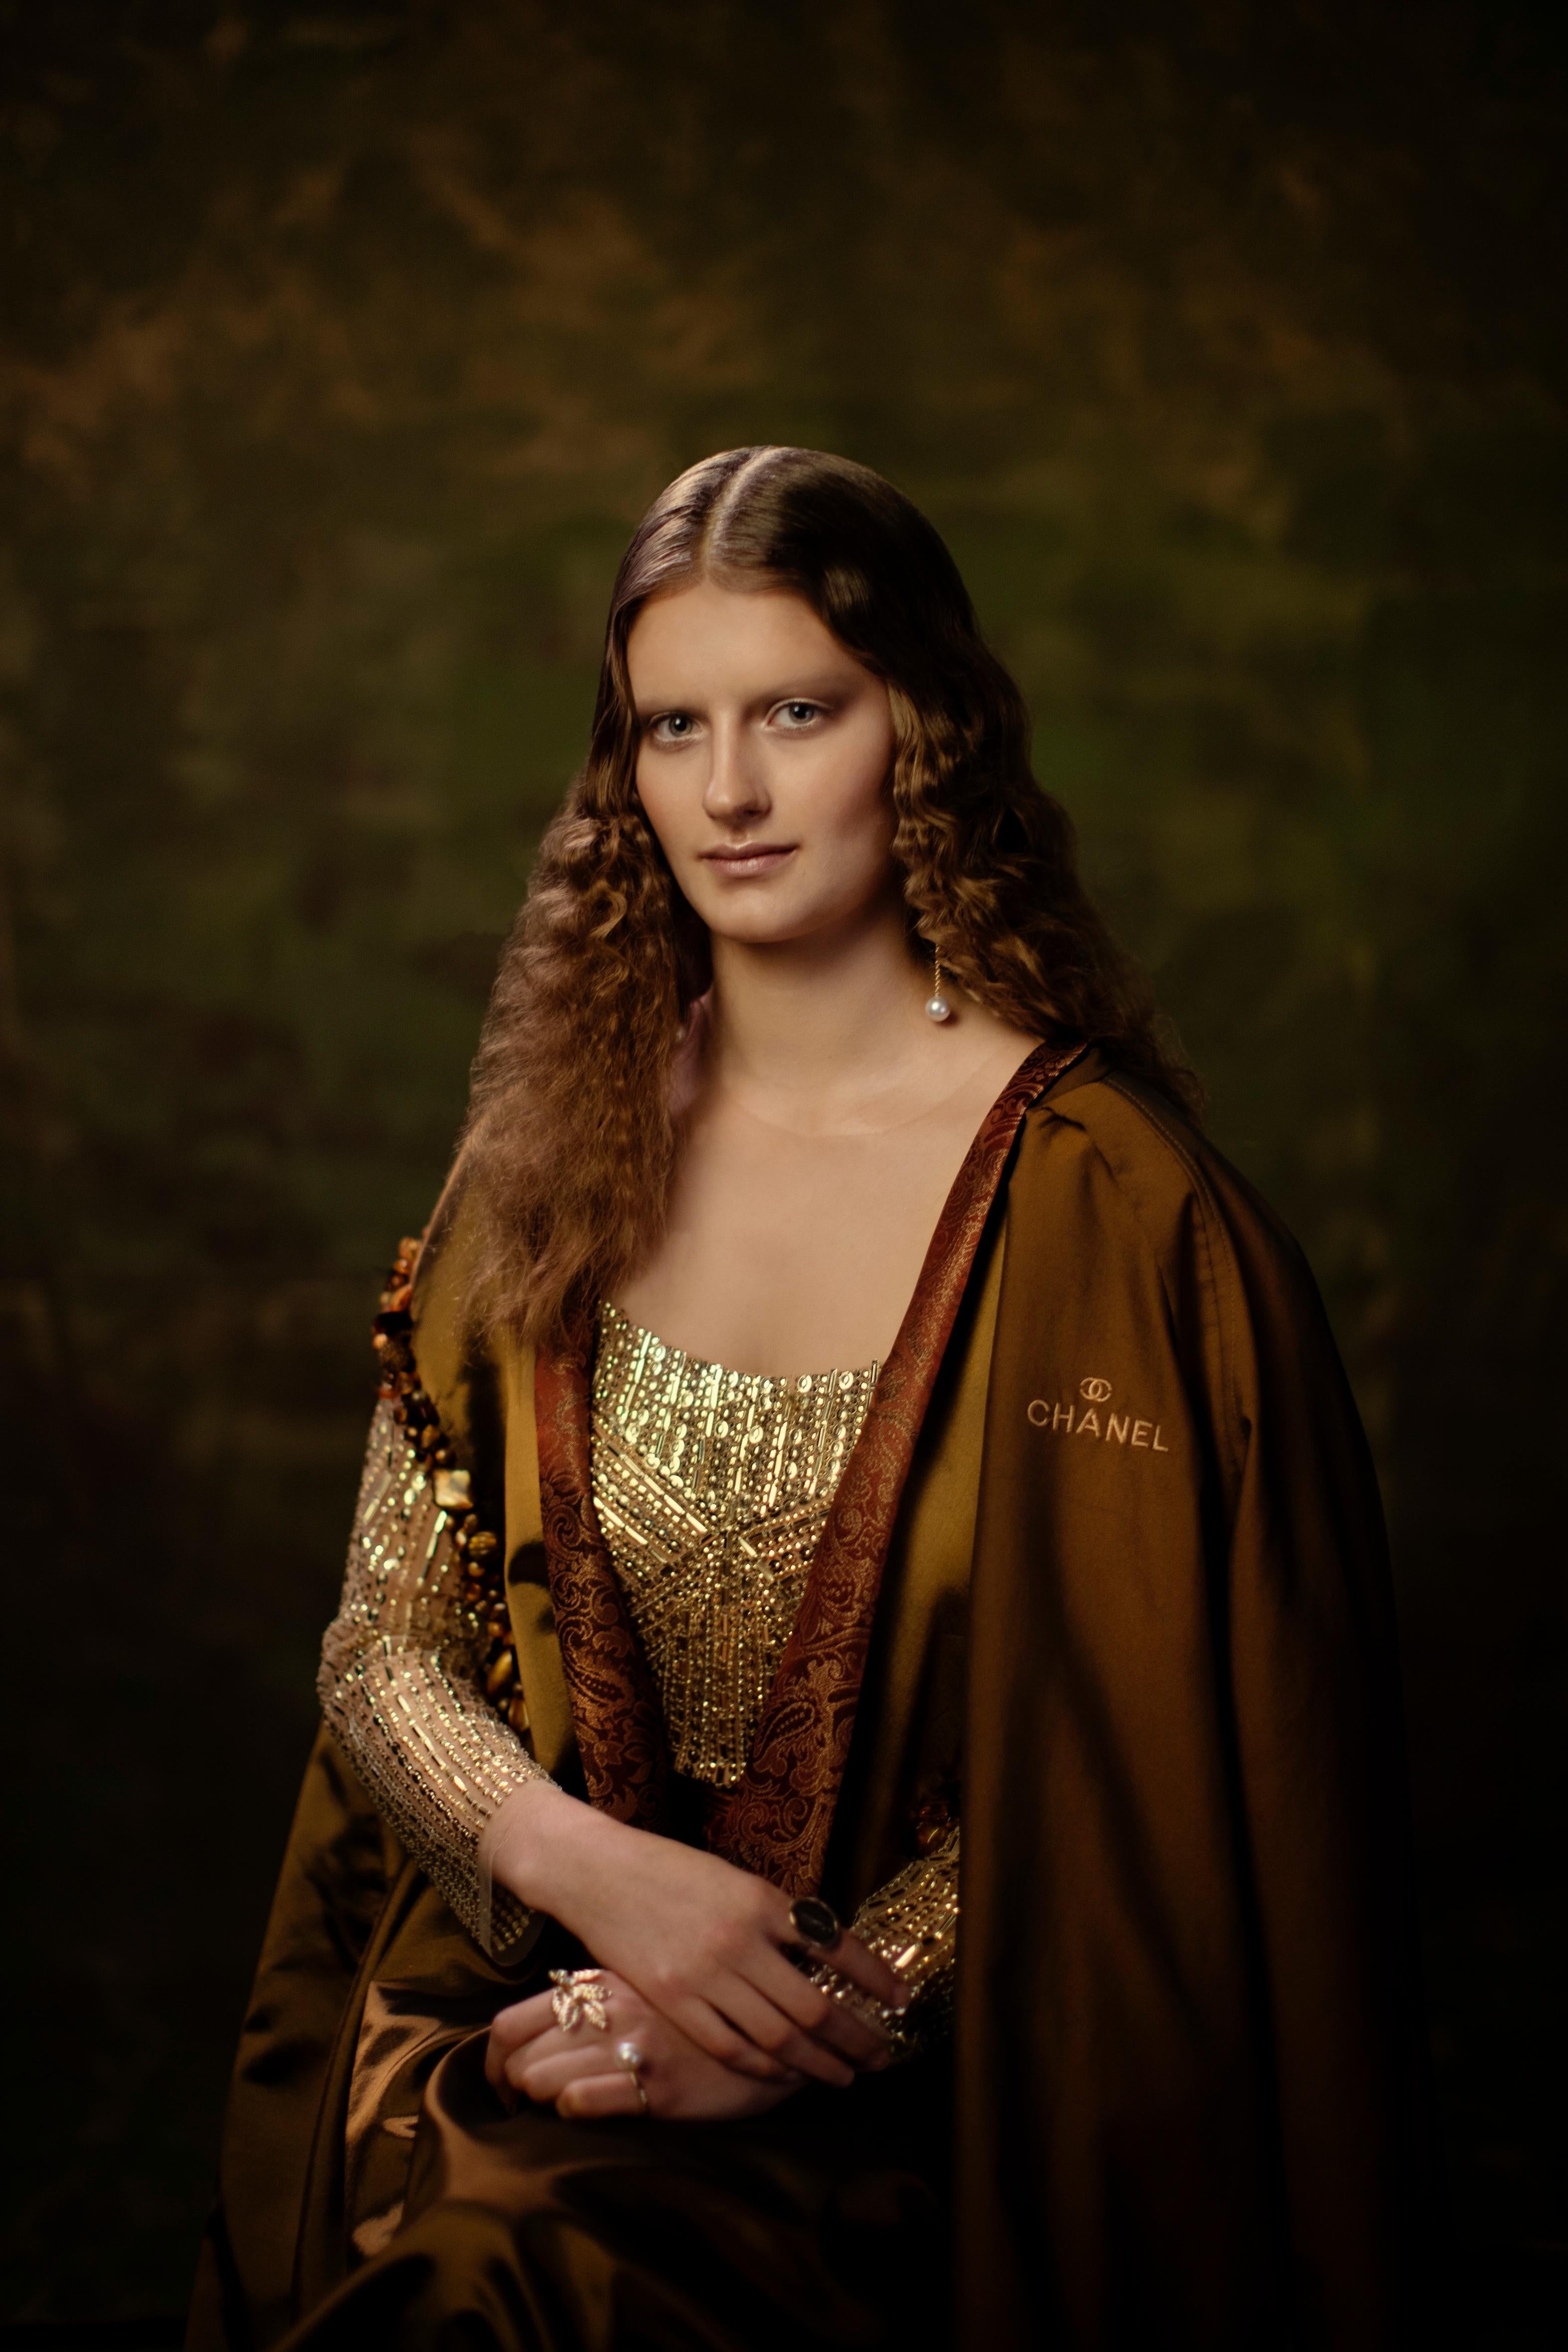 "Mona Lisa" Photography Print 40" x 30" inch Edition 1/1 by Viktorija Pashuta 

Full name:  Adele Bloch-Bauer by Klimt 

This artwork is printed on fine art Archival Matte Paper, also known as Moab Lasal Photo Matte. It features a smooth surface,